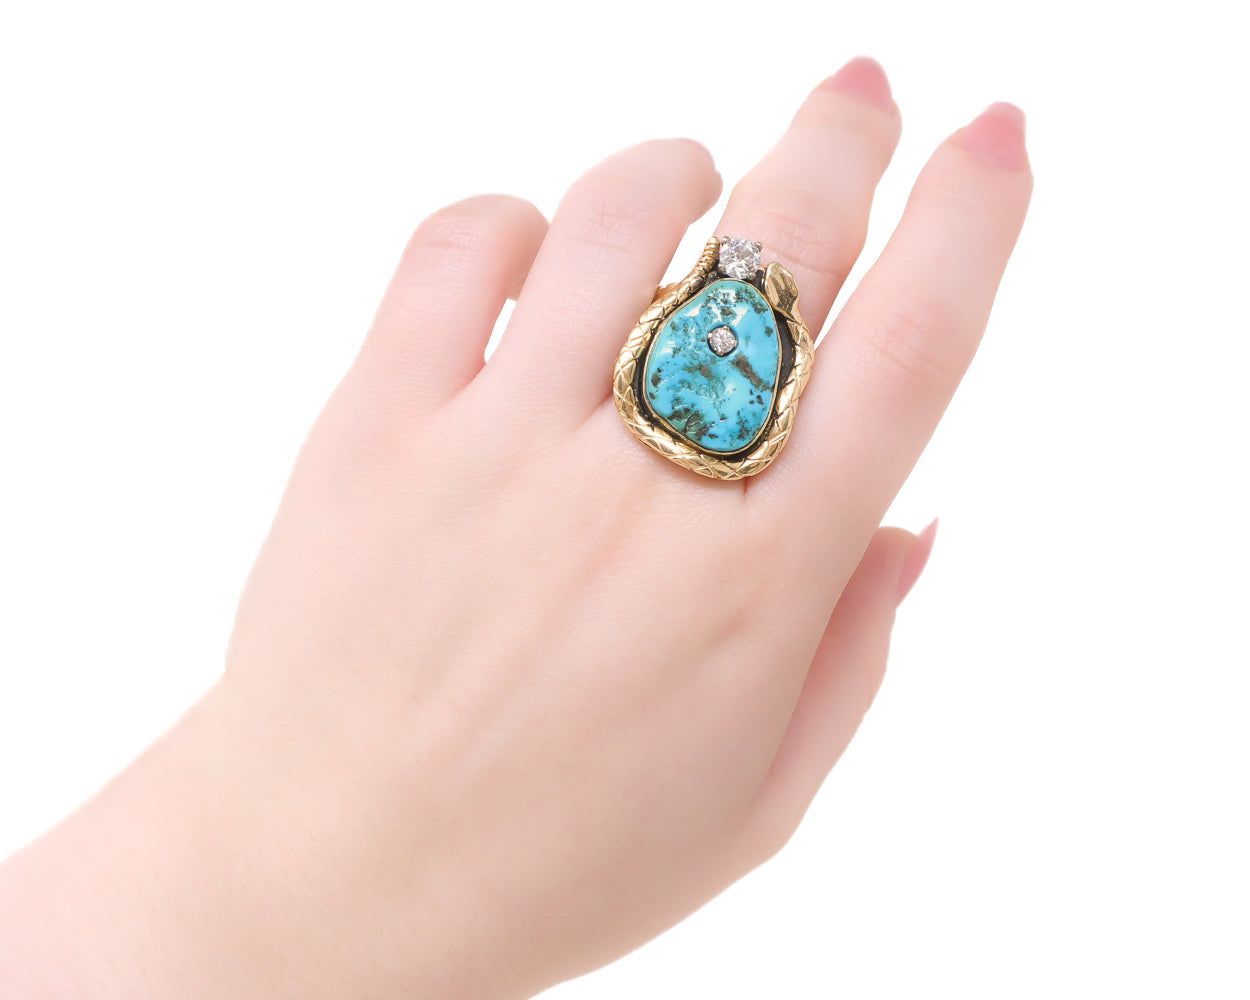 Late-Midcentury Turquoise Ring with Diamonds